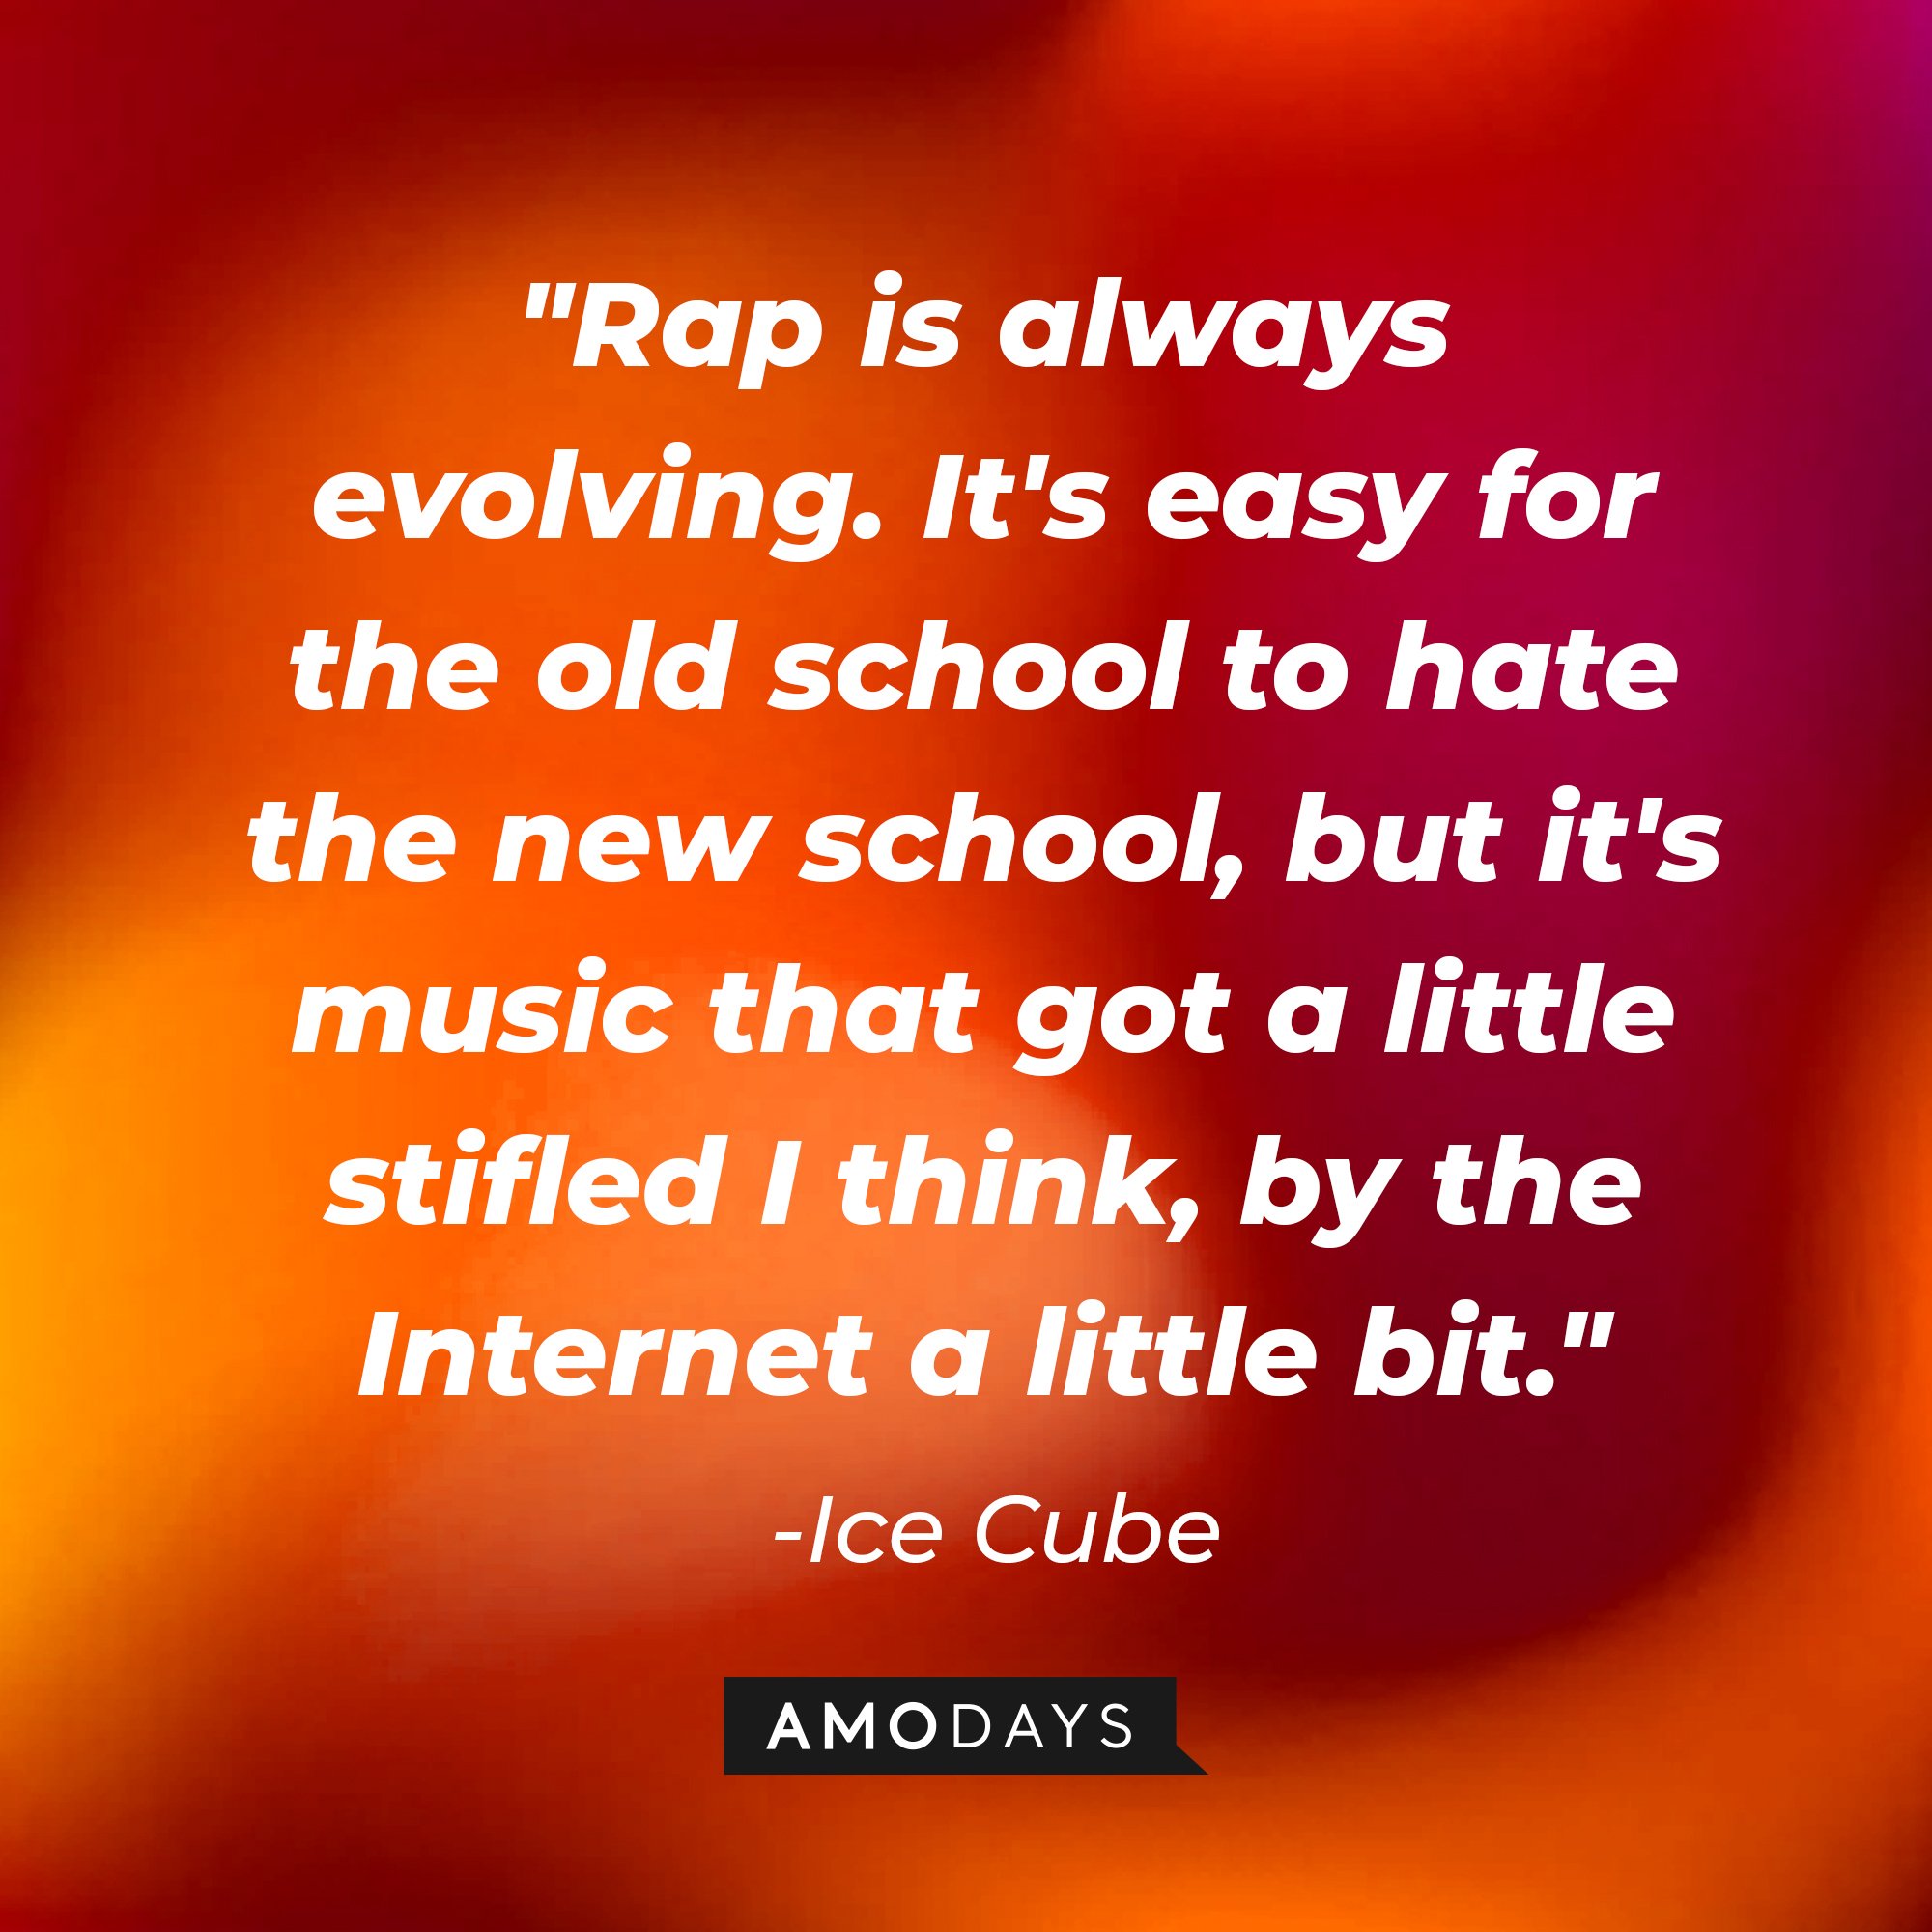 Ice Cube's quote: "Rap is always evolving. It's easy for the old school to hate the new school, but it's music that got a little stifled I think, by the Internet a little bit." — Ice Cube | Image: AmoDays